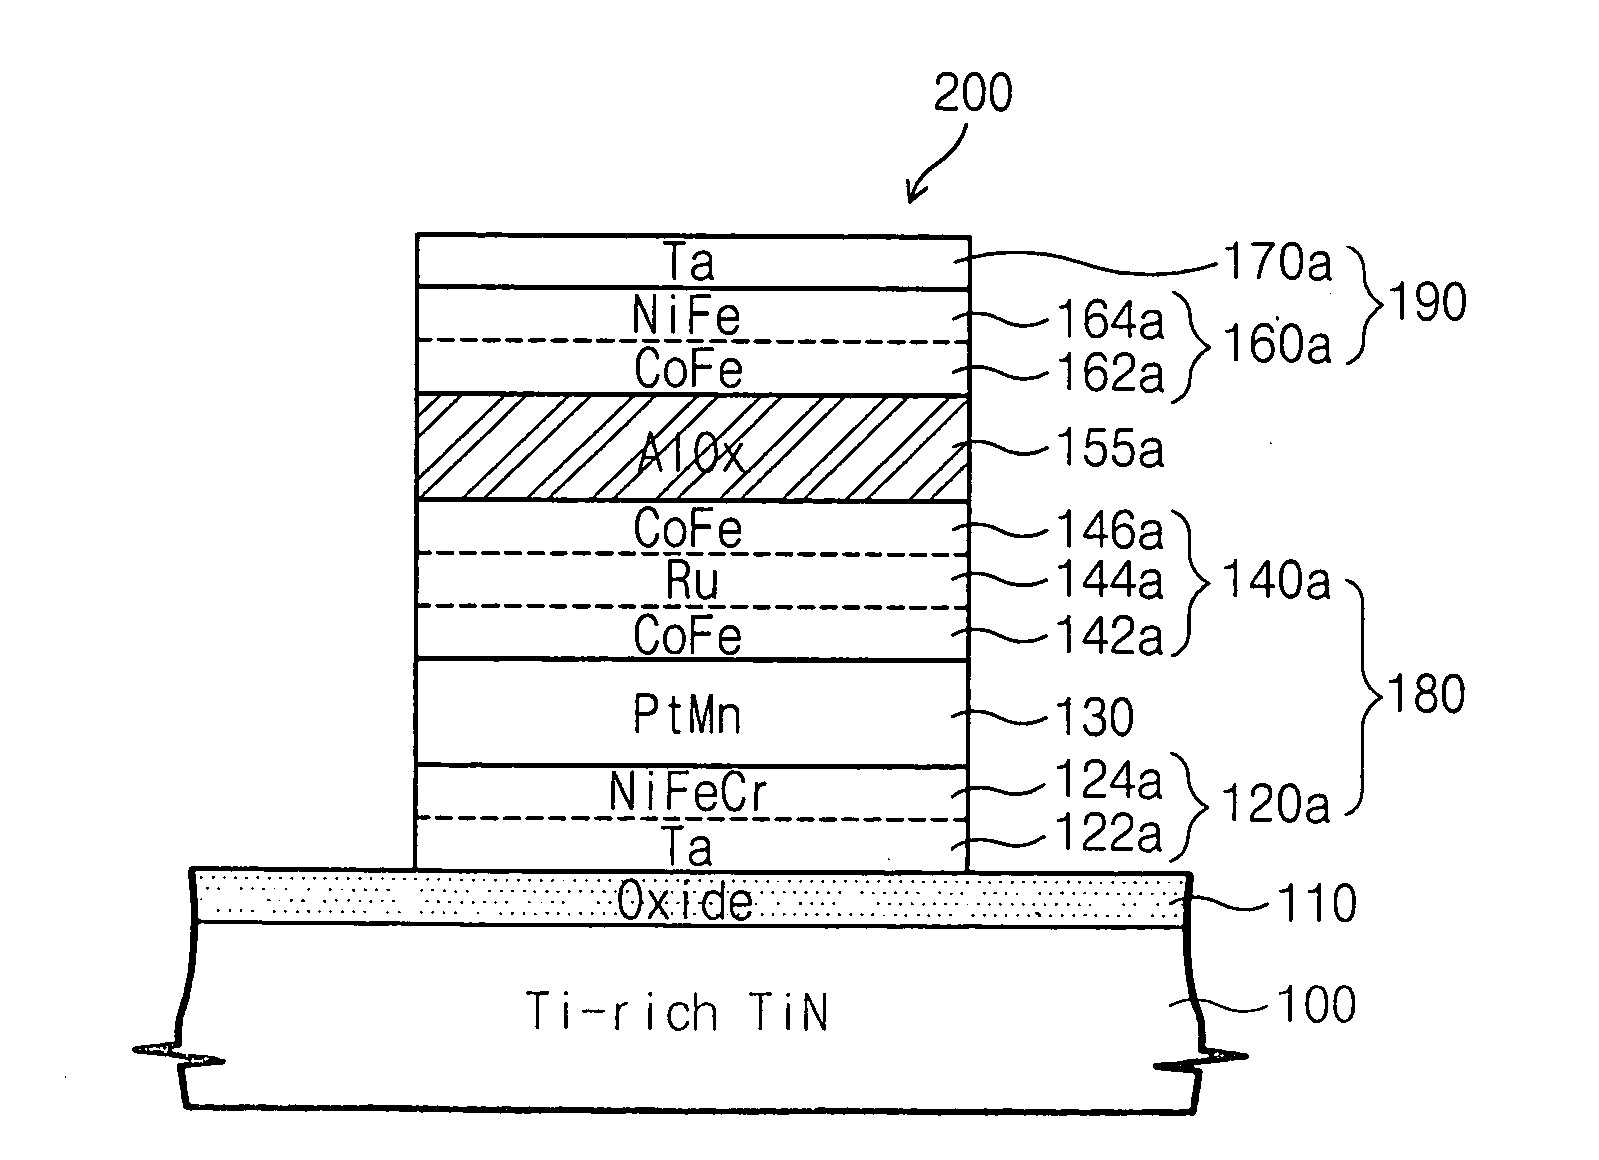 Magnetic random access memory devices having titanium-rich lower electrodes with oxide layer and oriented tunneling barrier, and methods for forming the same